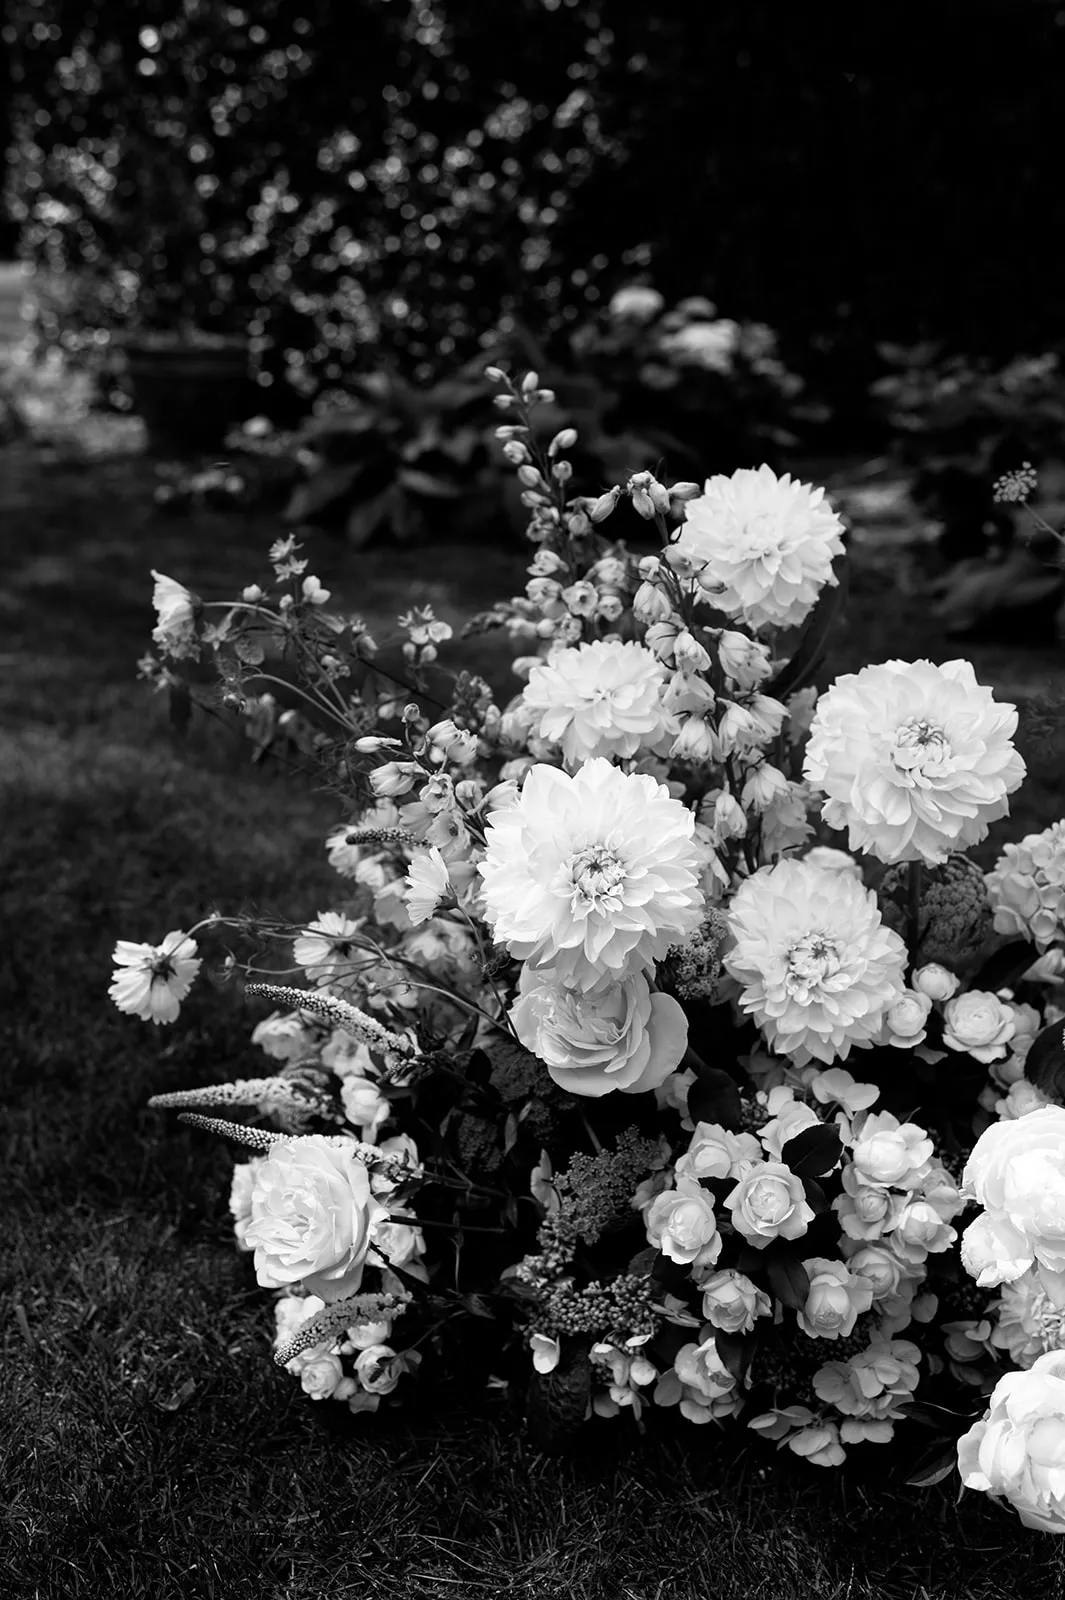 A black and white photograph showing an arrangement of various flowers, including large white dahlias and roses, placed on a patch of grass. The blurred background showcases additional foliage, adding depth to the floral display.